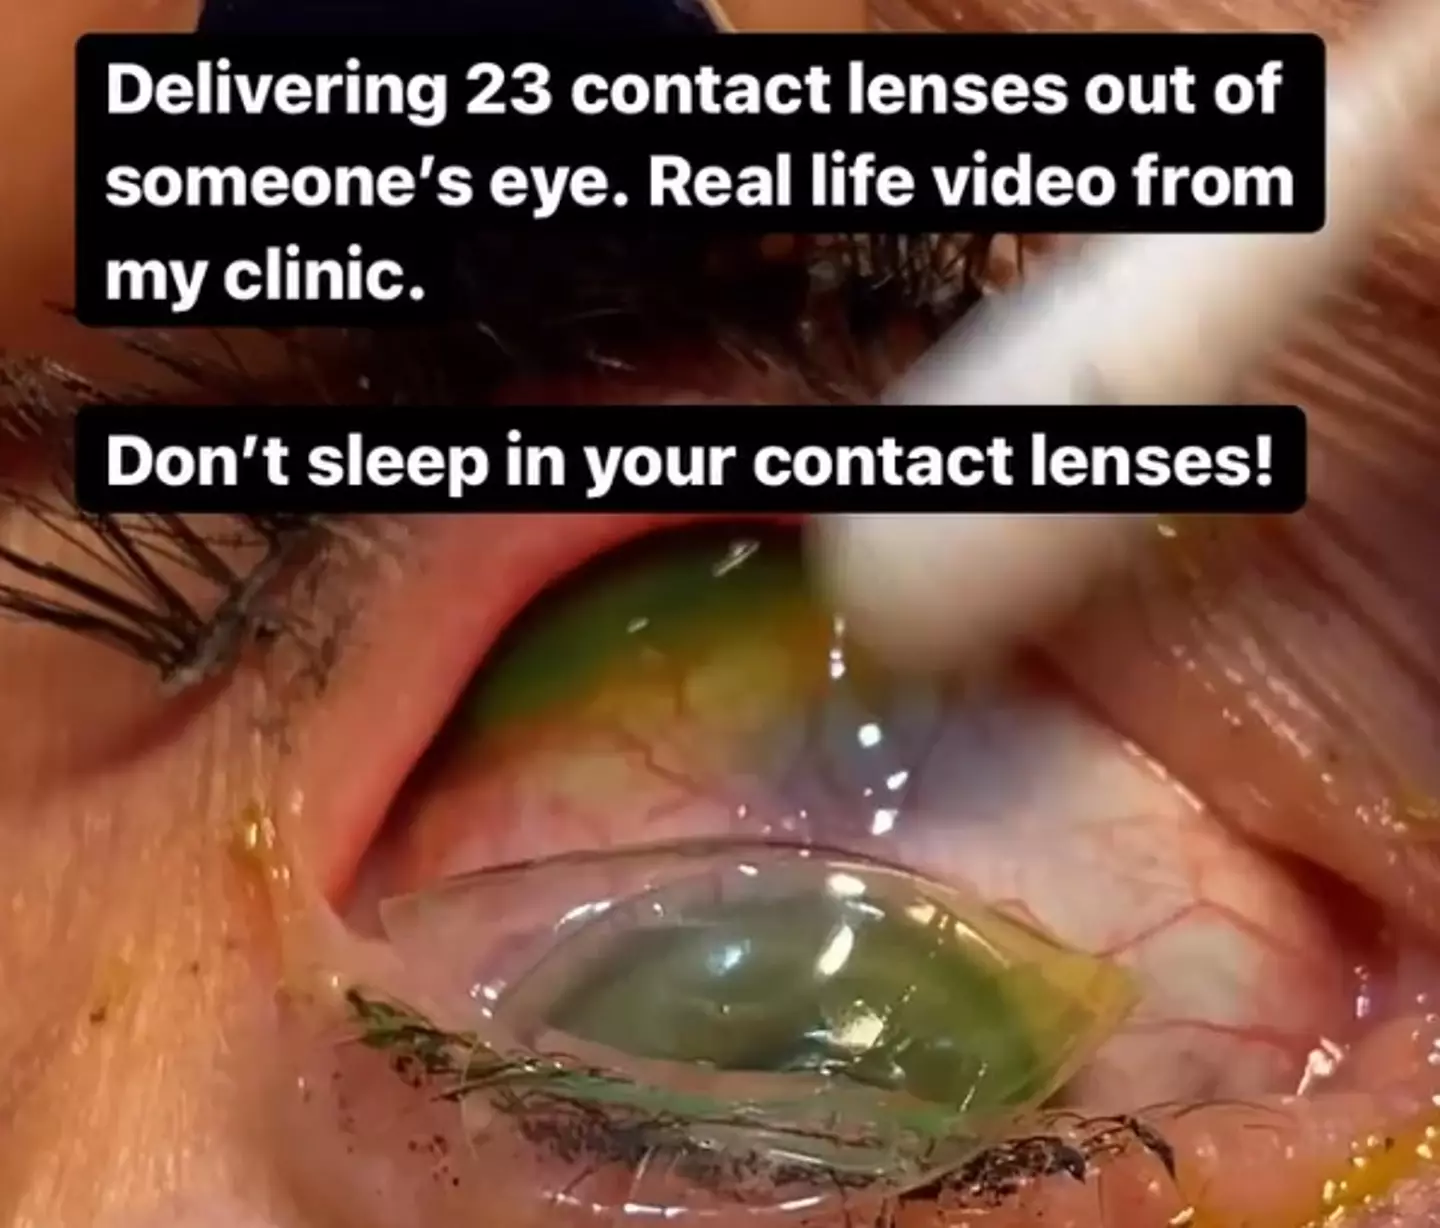 The contact lenses just kept coming.